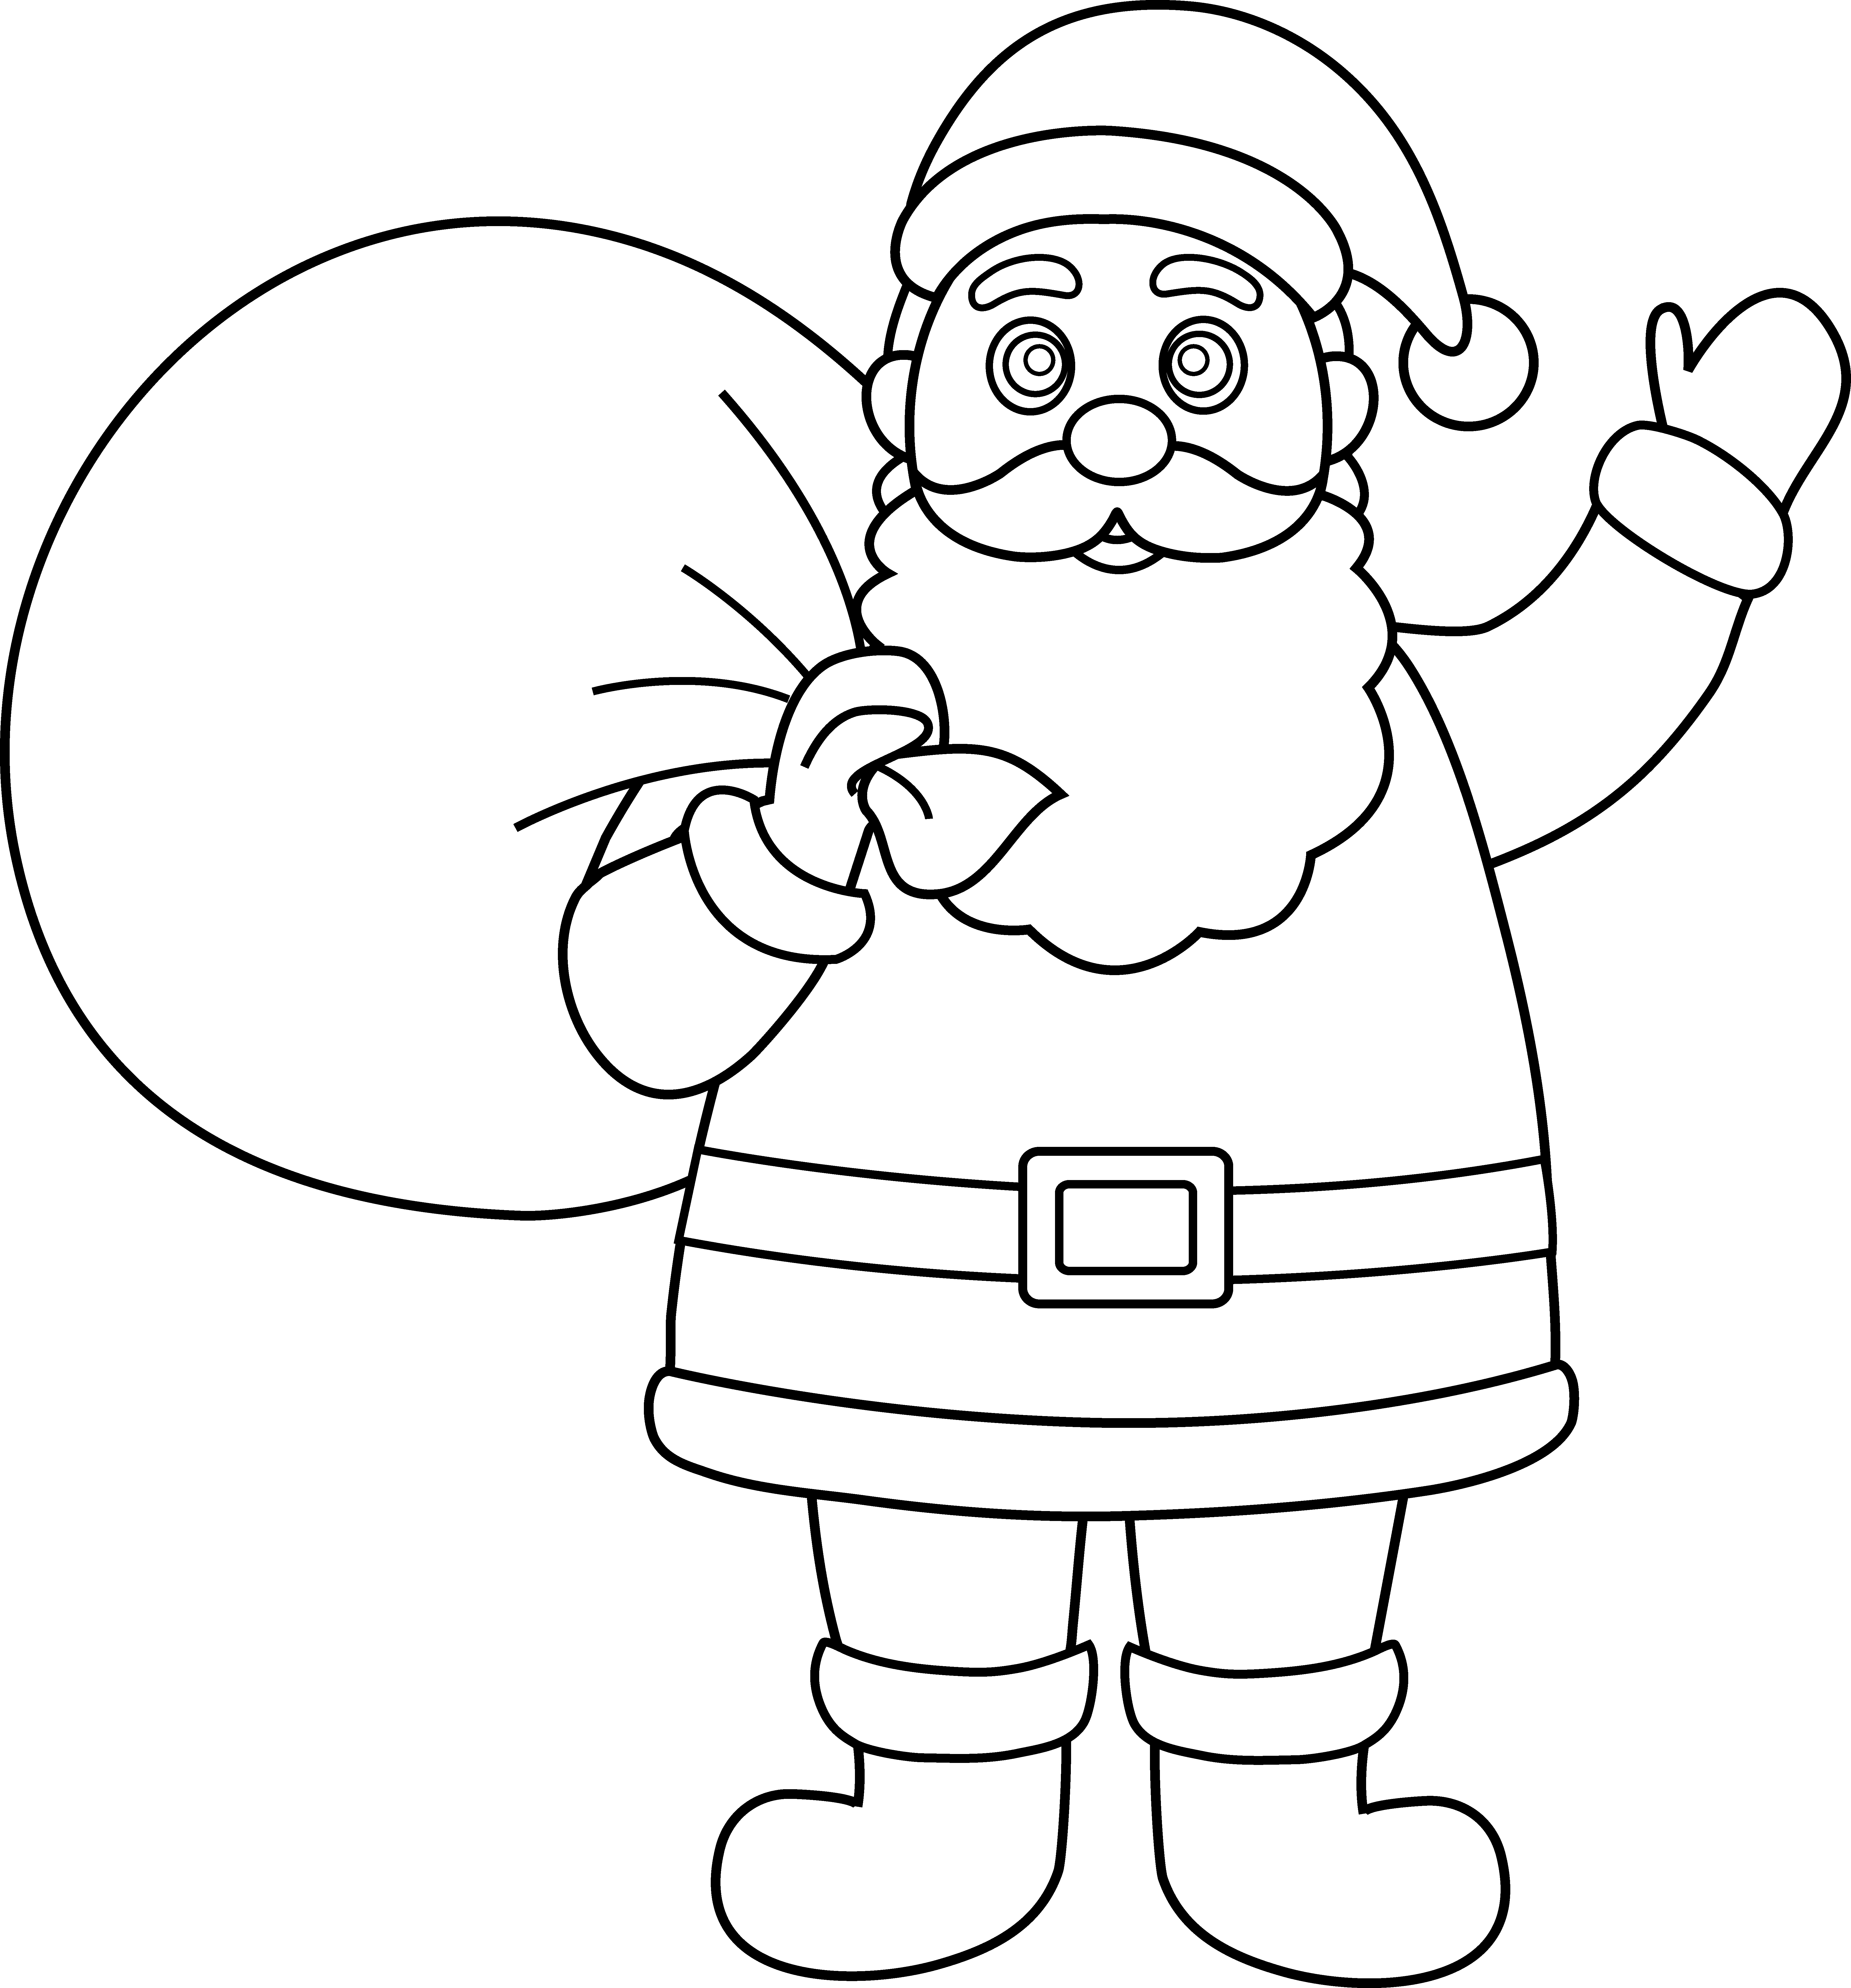 Free Pictures Of Black Santa Claus, Download Free Clip Art, Free Clip ...